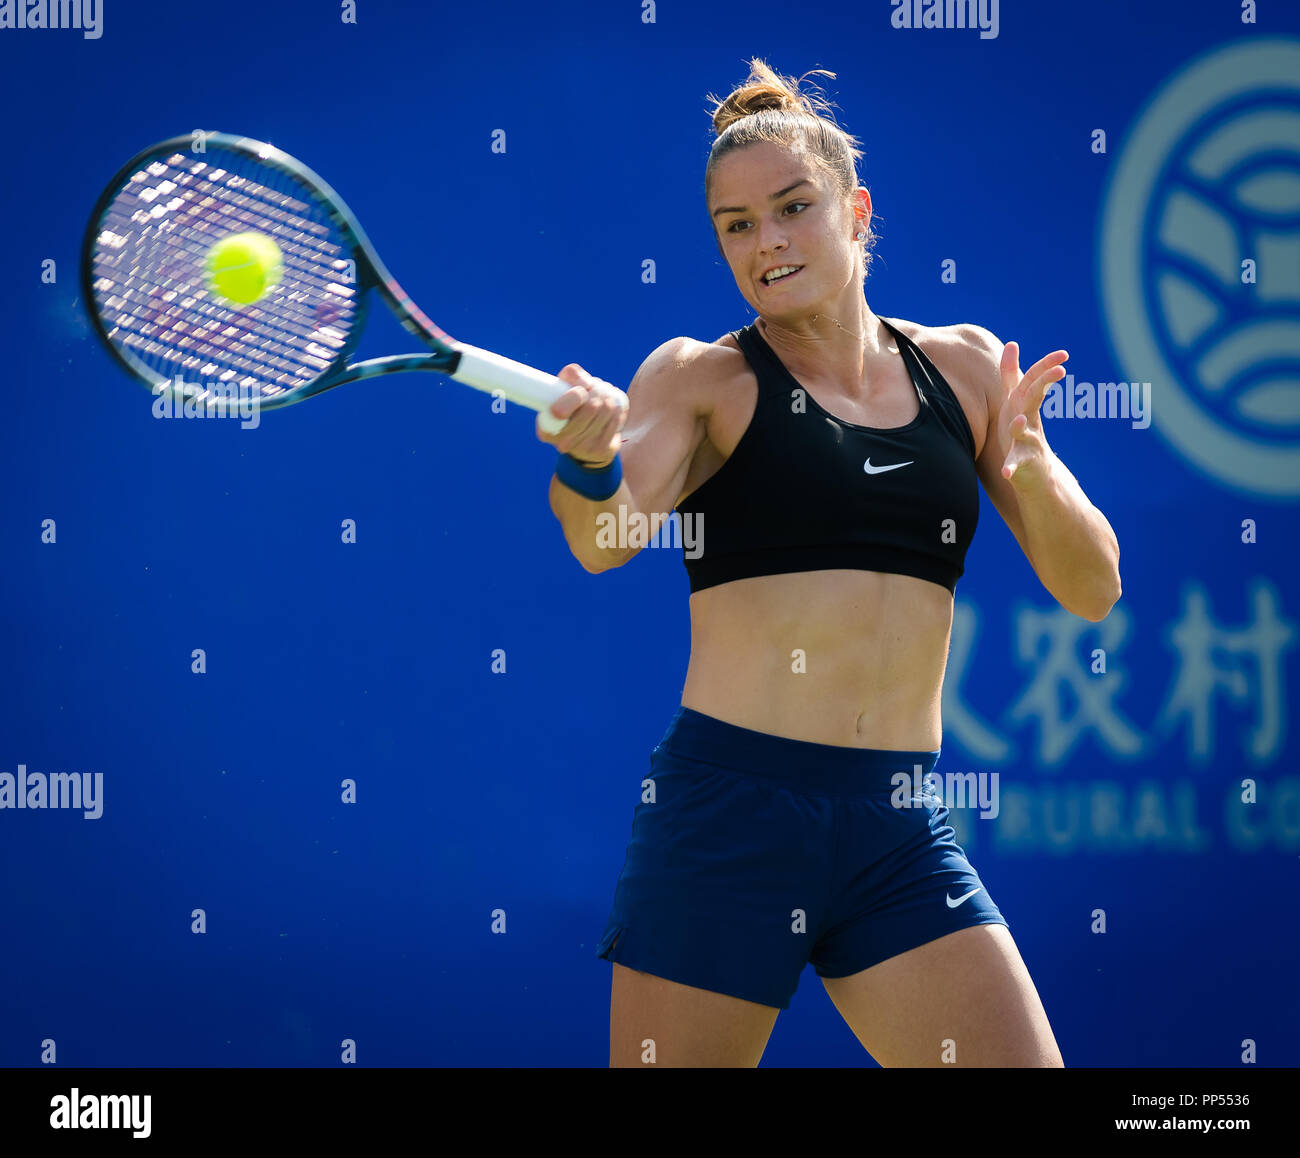 Wuhan, China. Wuhan, China. September 23, 2018 - Maria Sakkari of Greece  practices at the 2018 Dongfeng Motor Wuhan Open WTA Premier 5 tennis  tournament Credit: AFP7/ZUMA Wire/Alamy Live News Stock Photo - Alamy